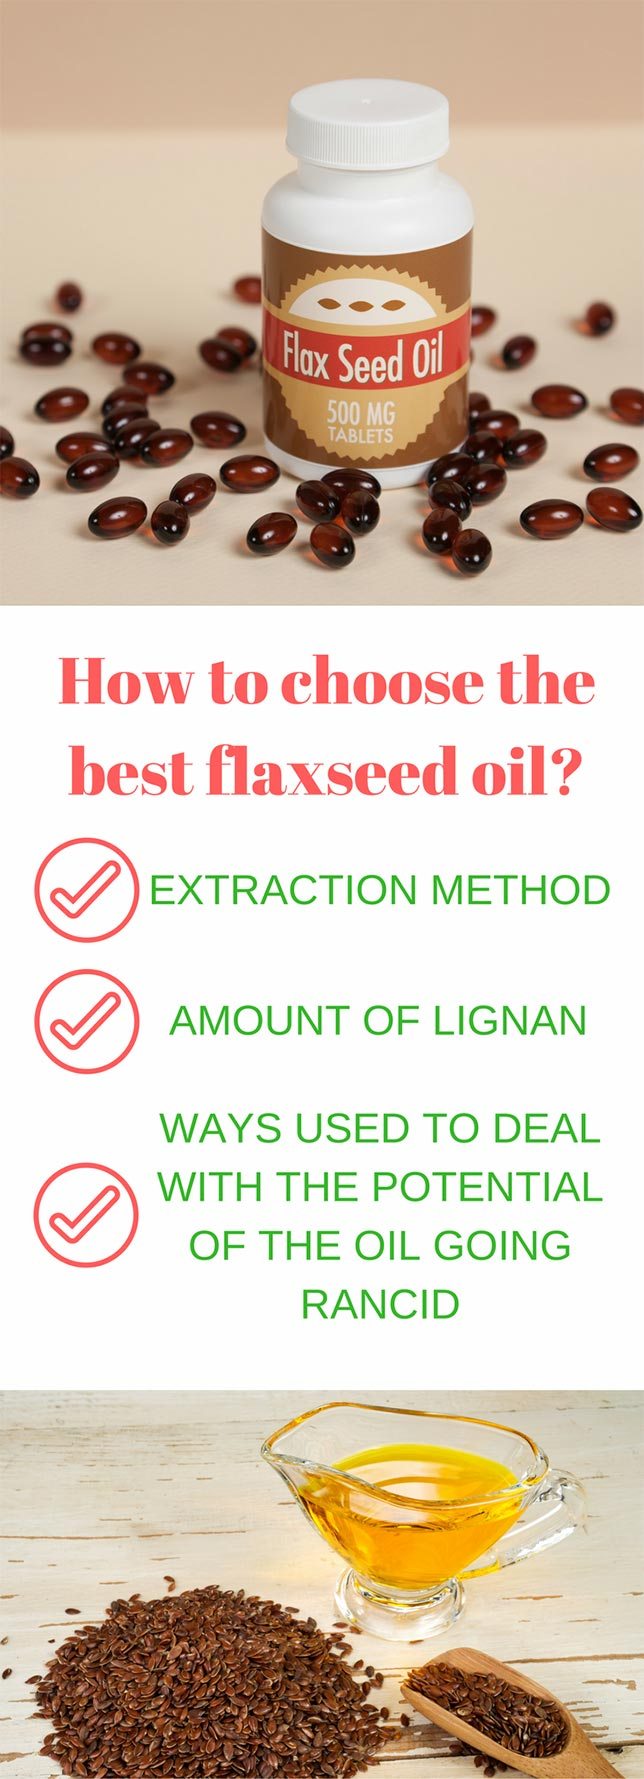 Best flaxseed oil how to choose